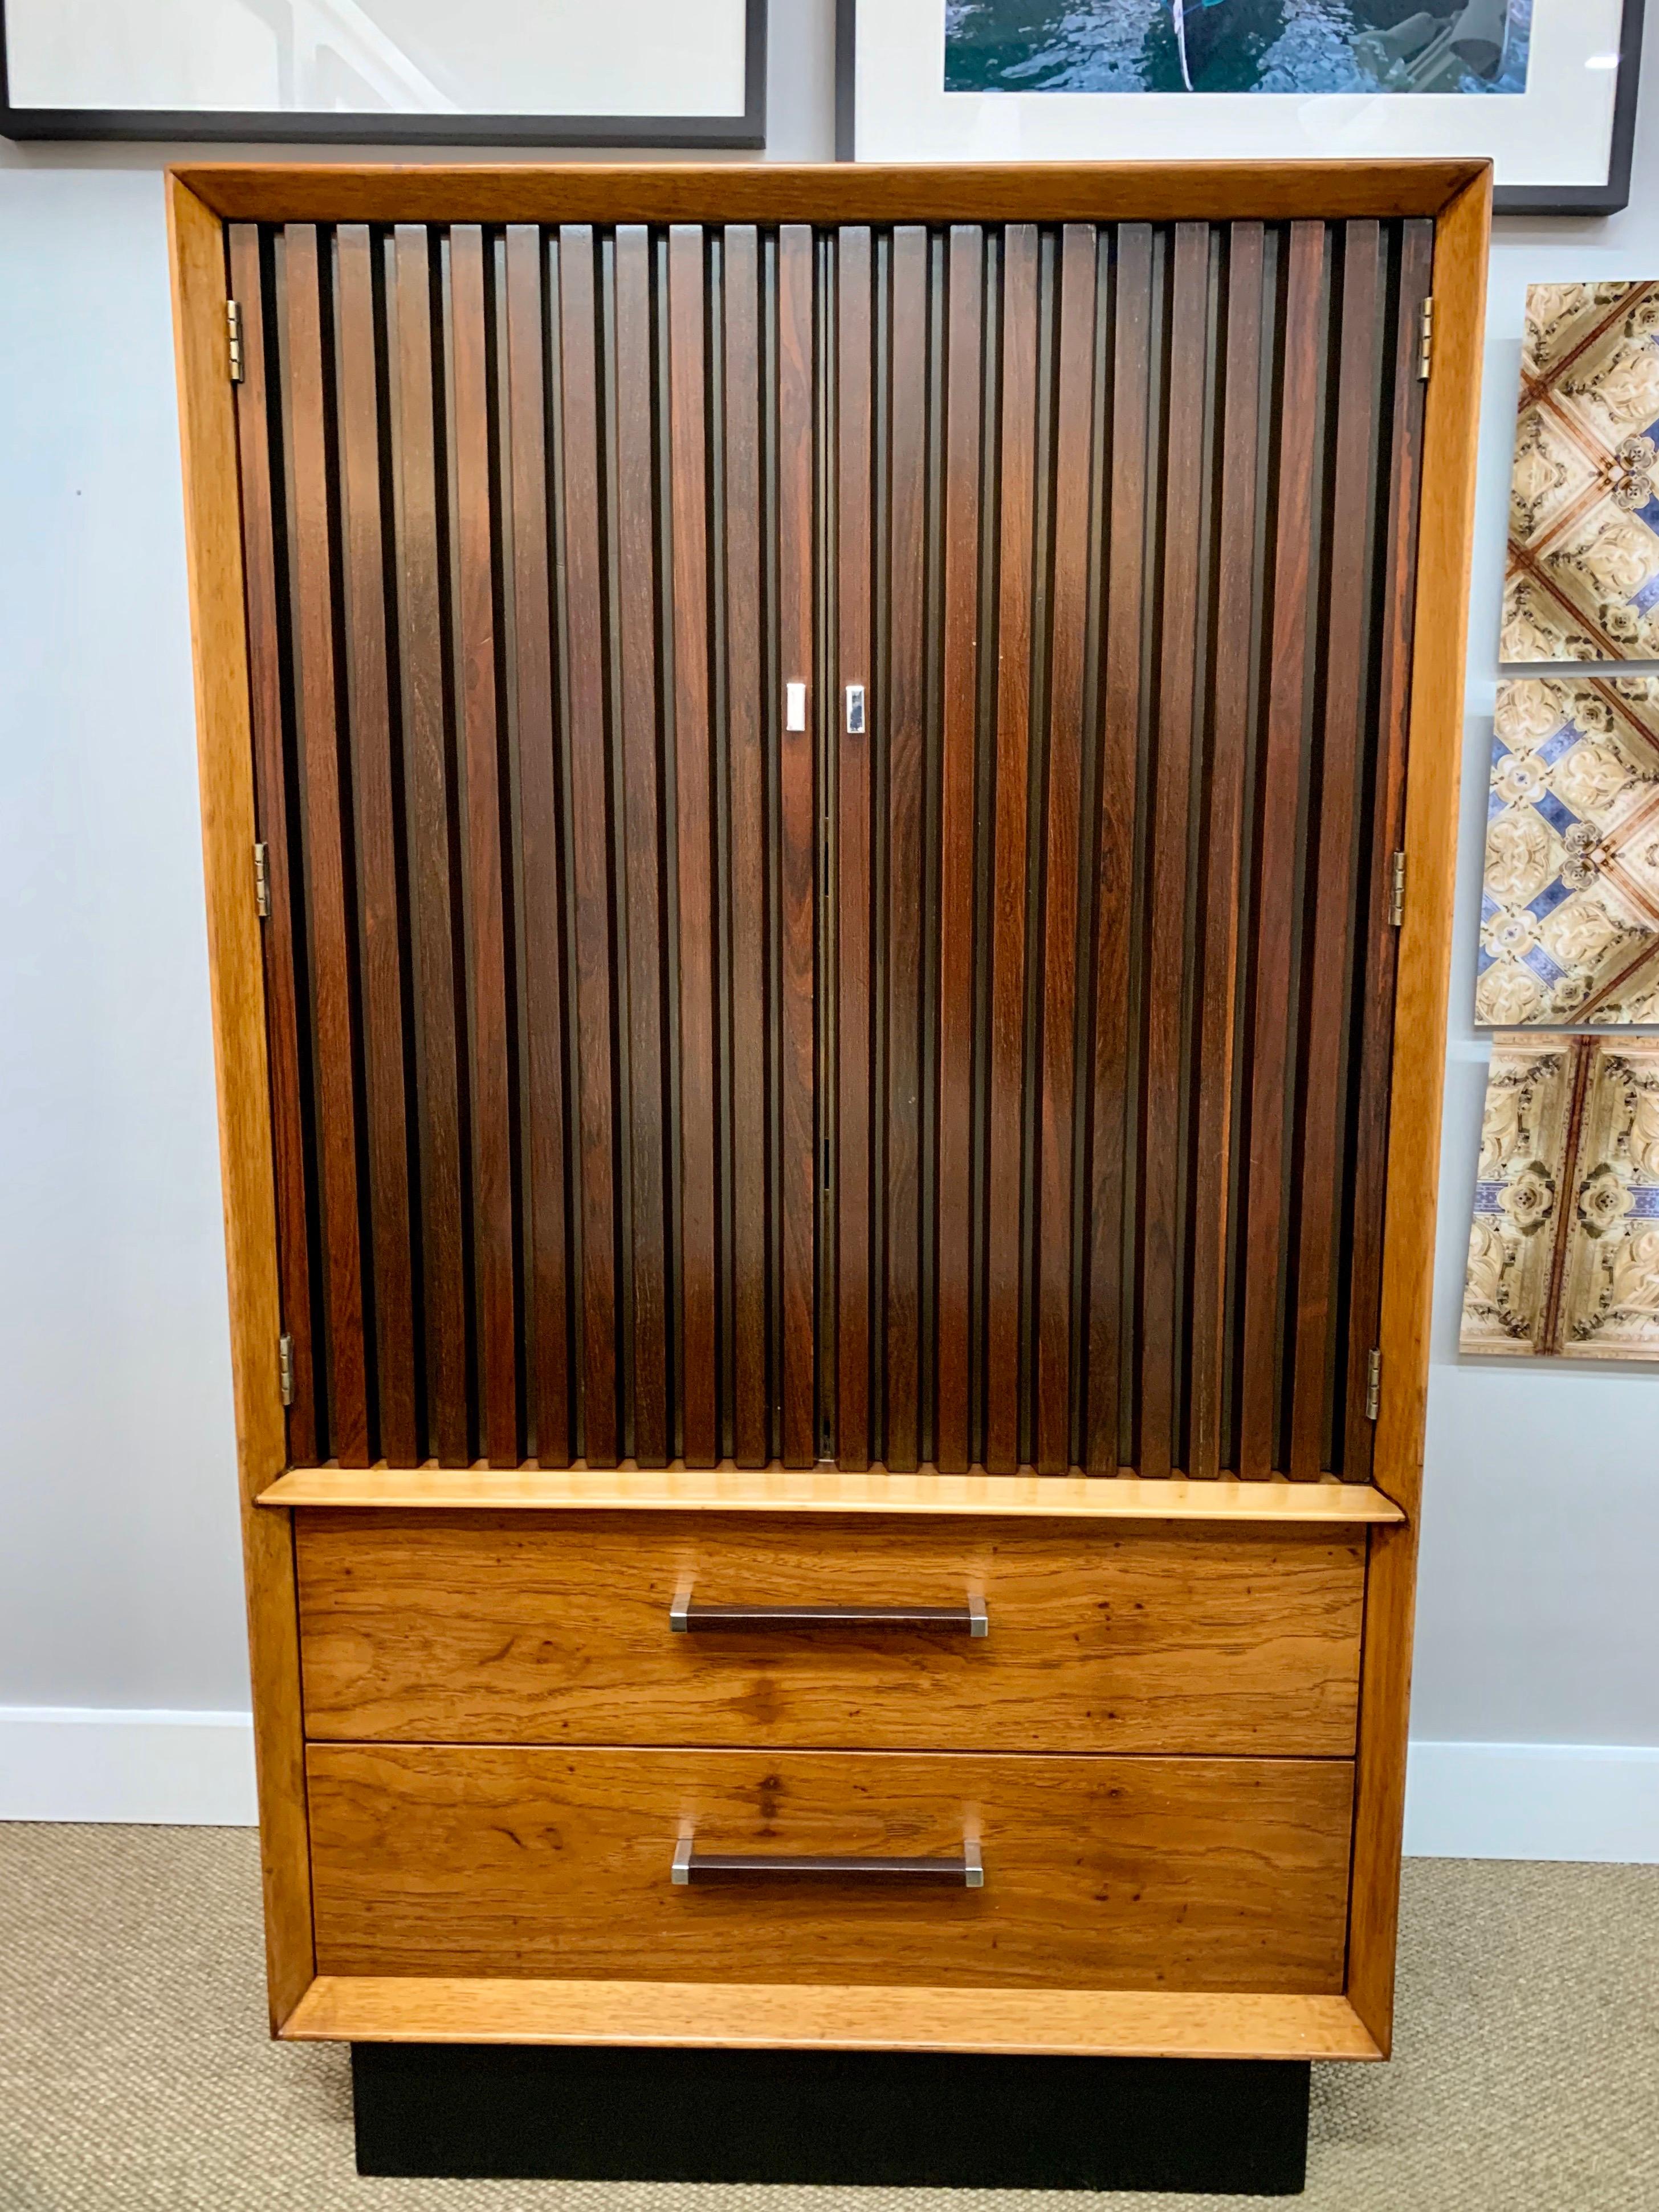 Elegant signed Lane Furniture wardrobe armoire. An iconic Brutalist cabinet with drawers at
bottom and doors at top that open to show two drawers and them cubbies at the top part.
The color scheme is quite unusual, even for Lane, with a black base